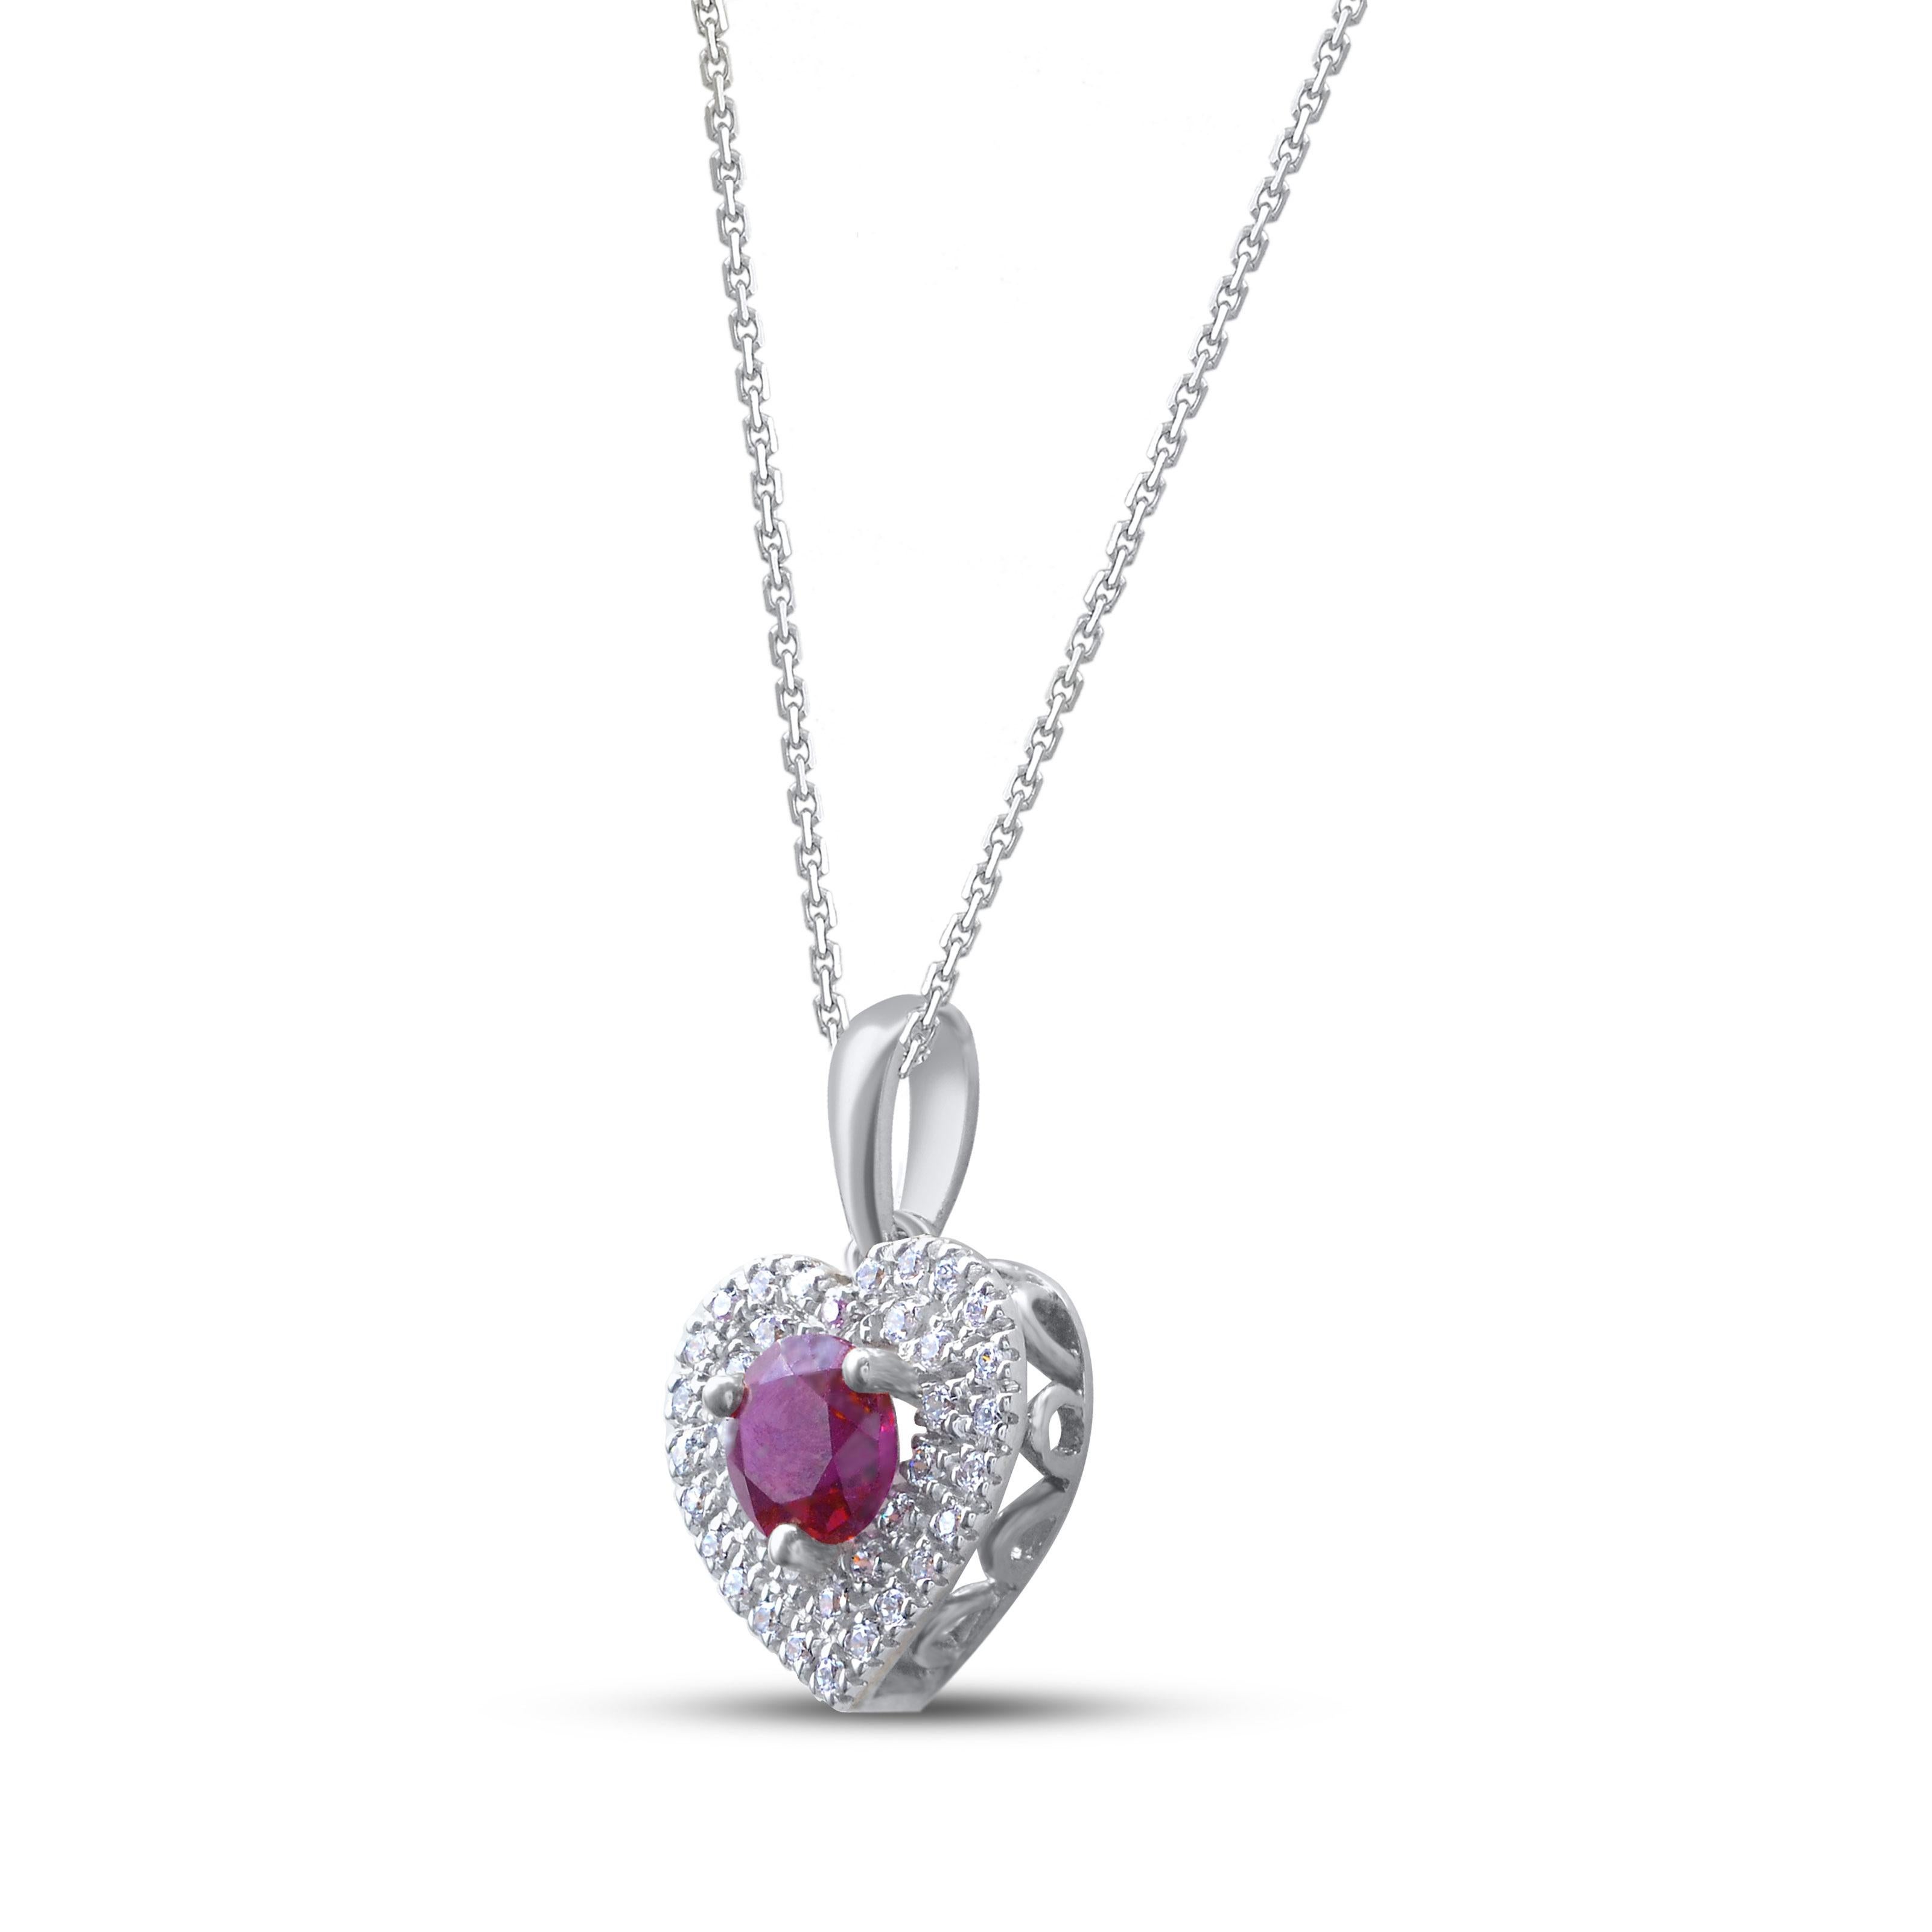 Bring charm to your look with this diamond heart pendant. The pendant is crafted from 14 karat White gold and features Round Brilliant 37 white diamonds and 1 ruby gemstone set in micro-prong and prong set, H-I color I2 clarity and a high polish